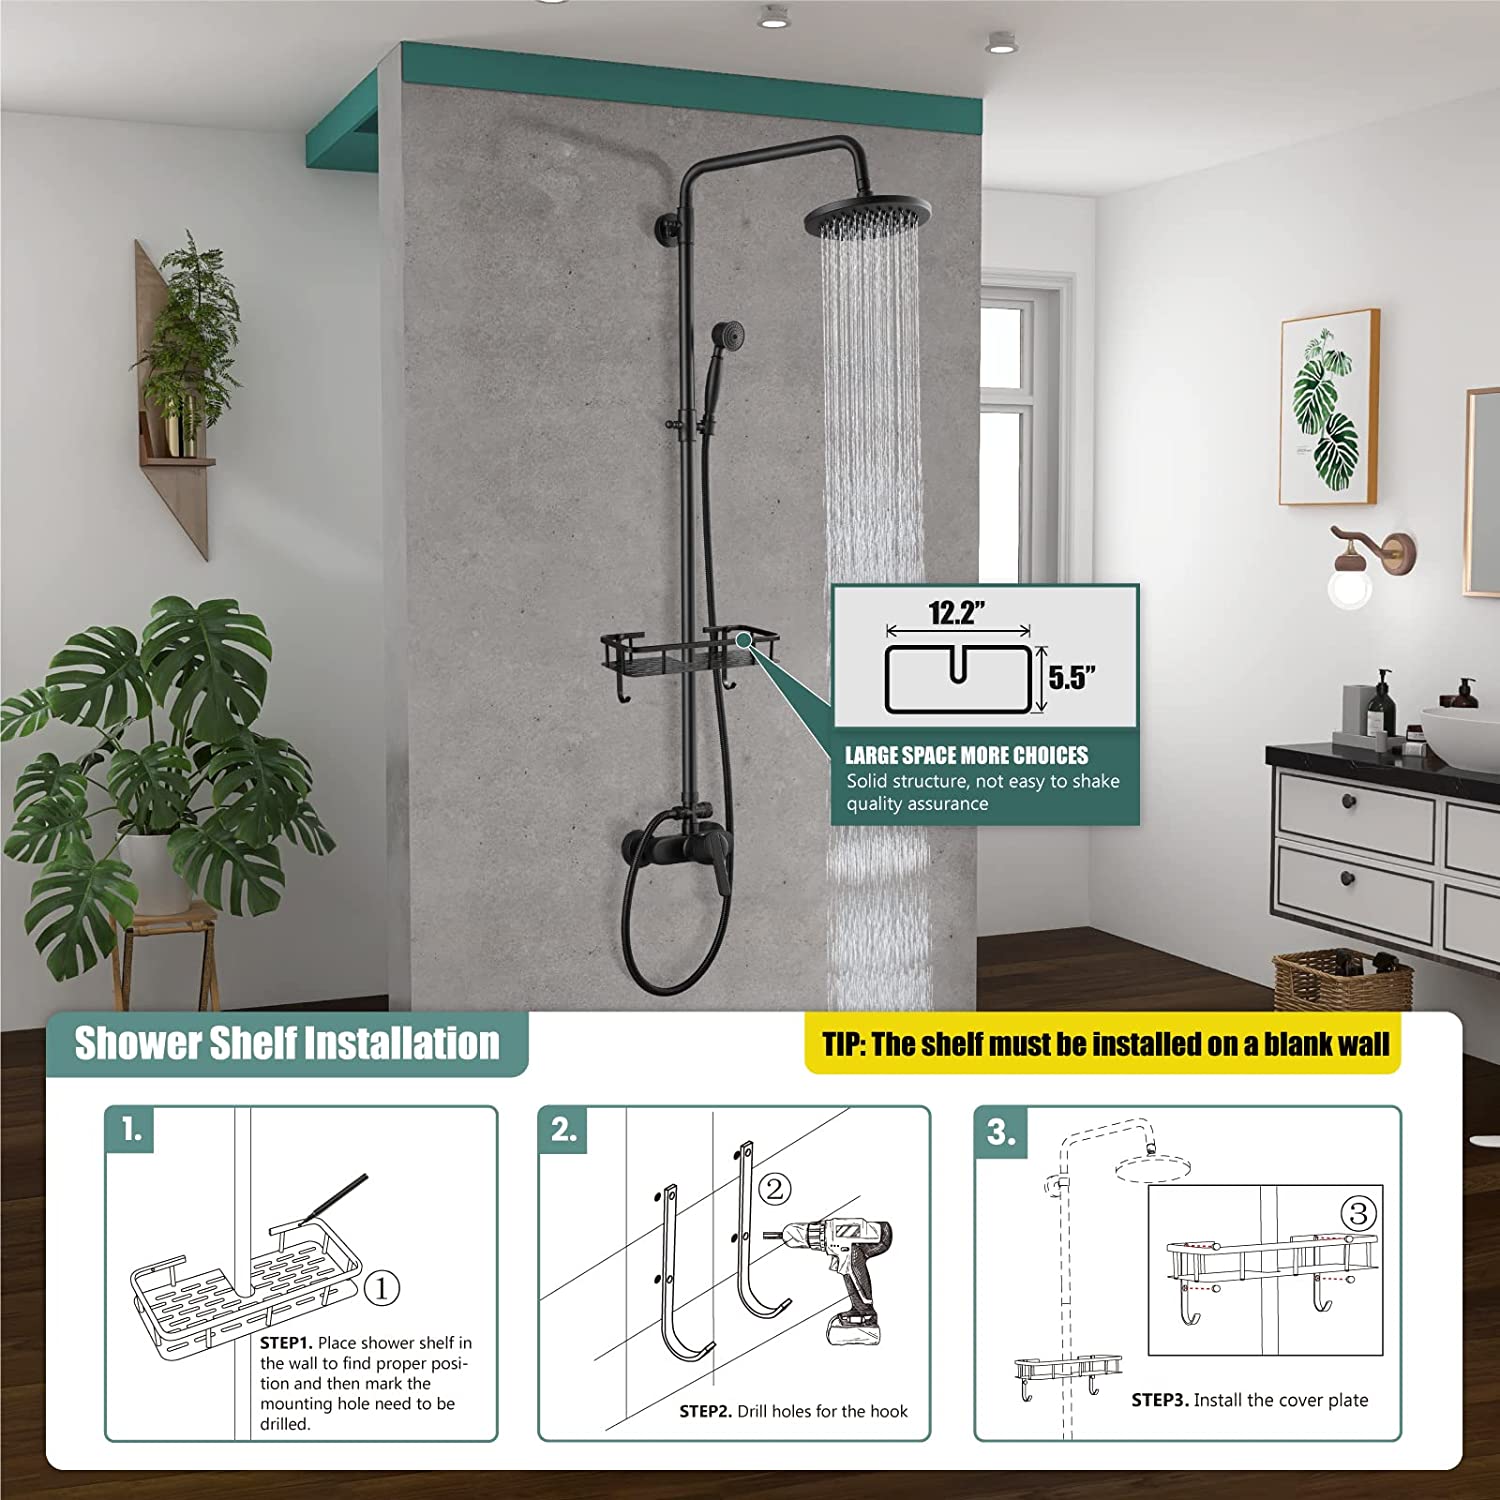 Heyalan Exposed Pipe Shower System 8 Inch Rainfall Shower Head Fixture Combo Set Single Handle with Handheld Sprayer Bathroom Shower Faucet Adjustable Showerhead Bar with Shower Shelf